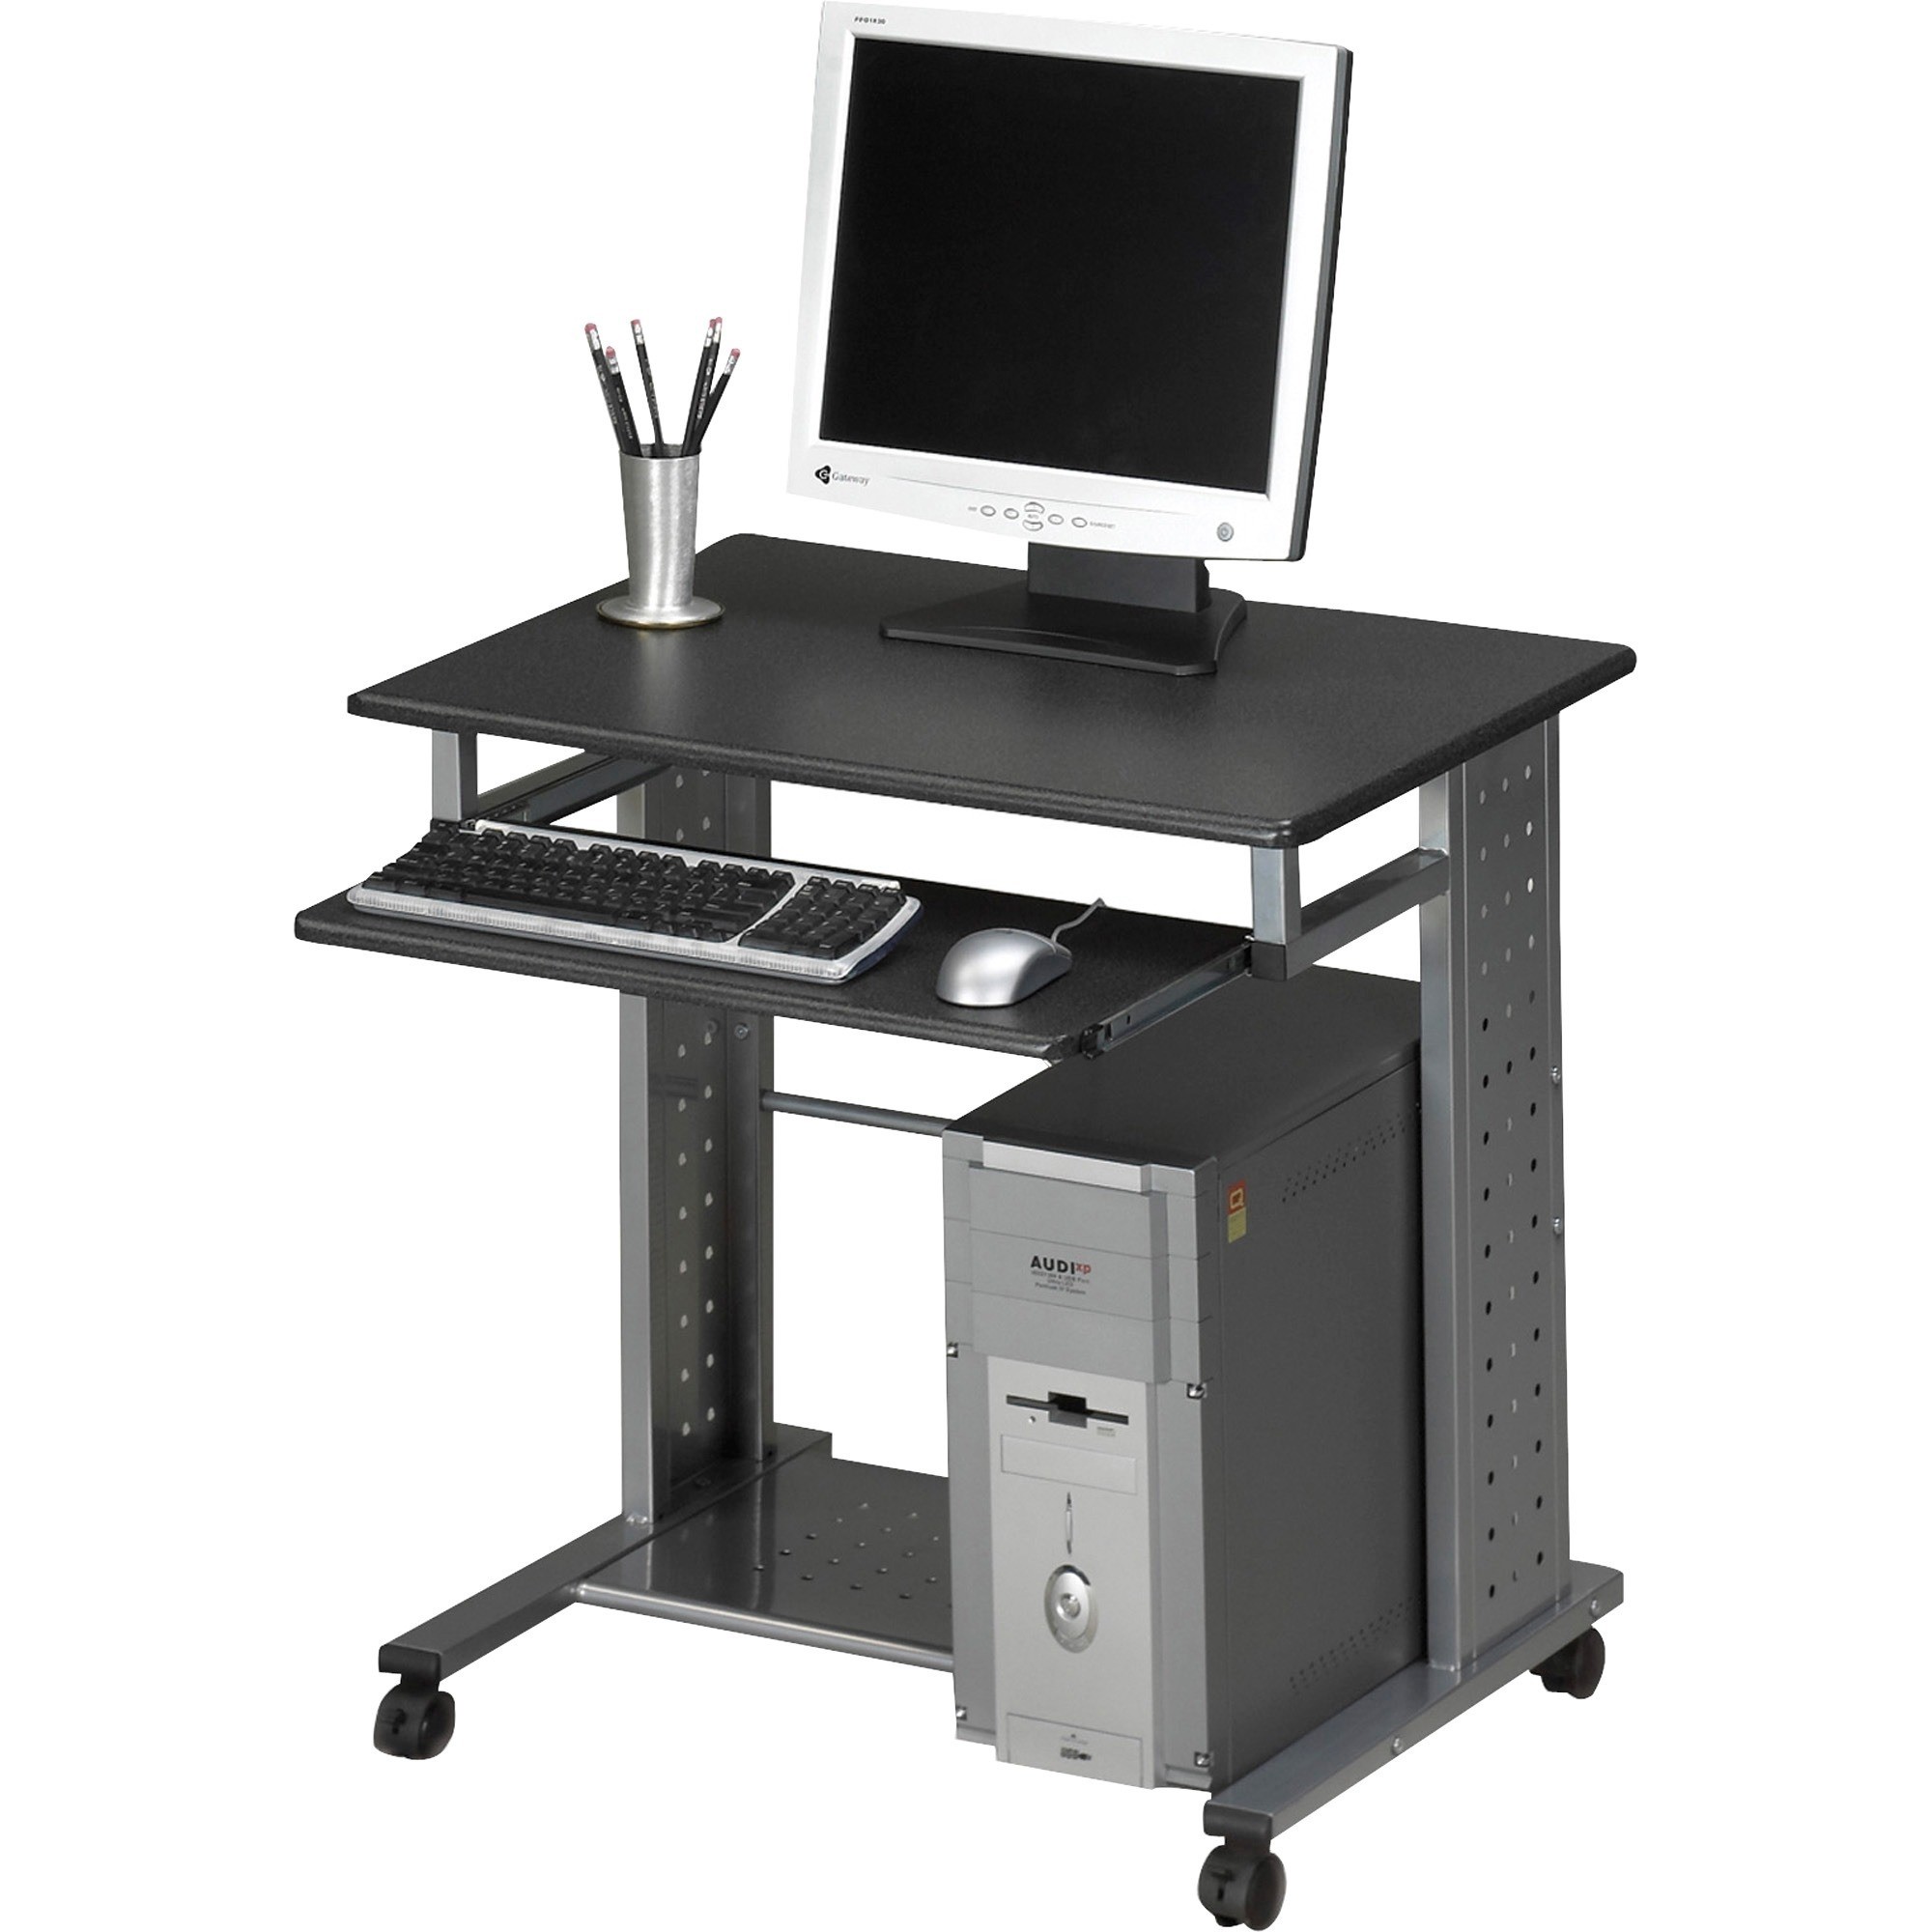 NEW Compact Workstation on Wheels Computer Desk with Slide Out Keyboard Tray